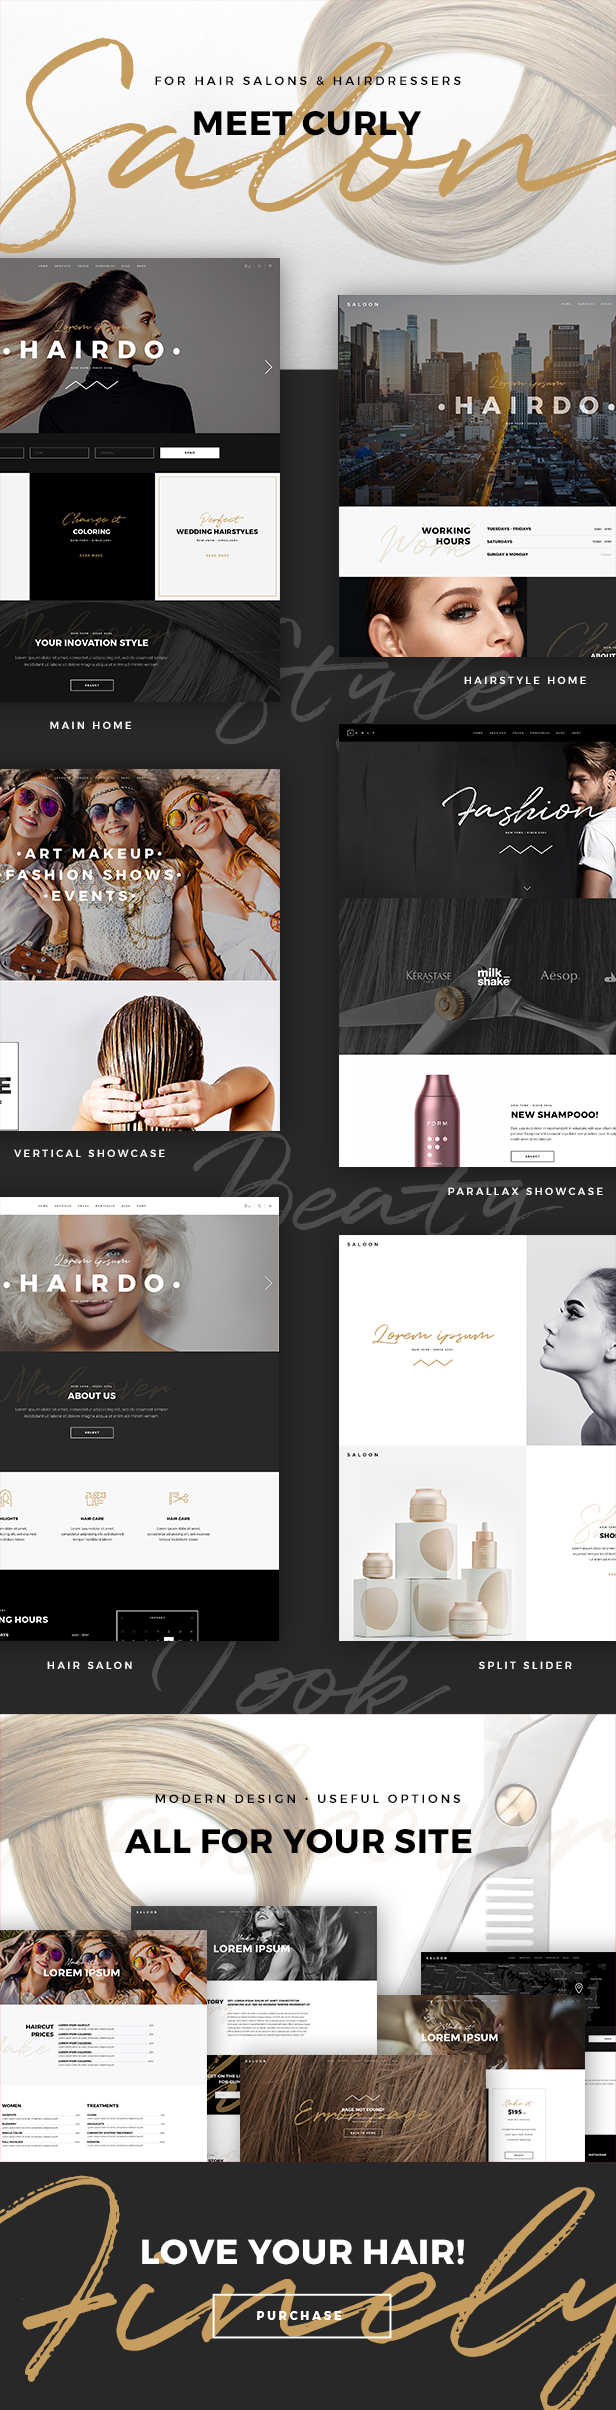 WordPress theme Curly - A Stylish Theme for Hairdressers and Hair Salons (Health & Beauty)